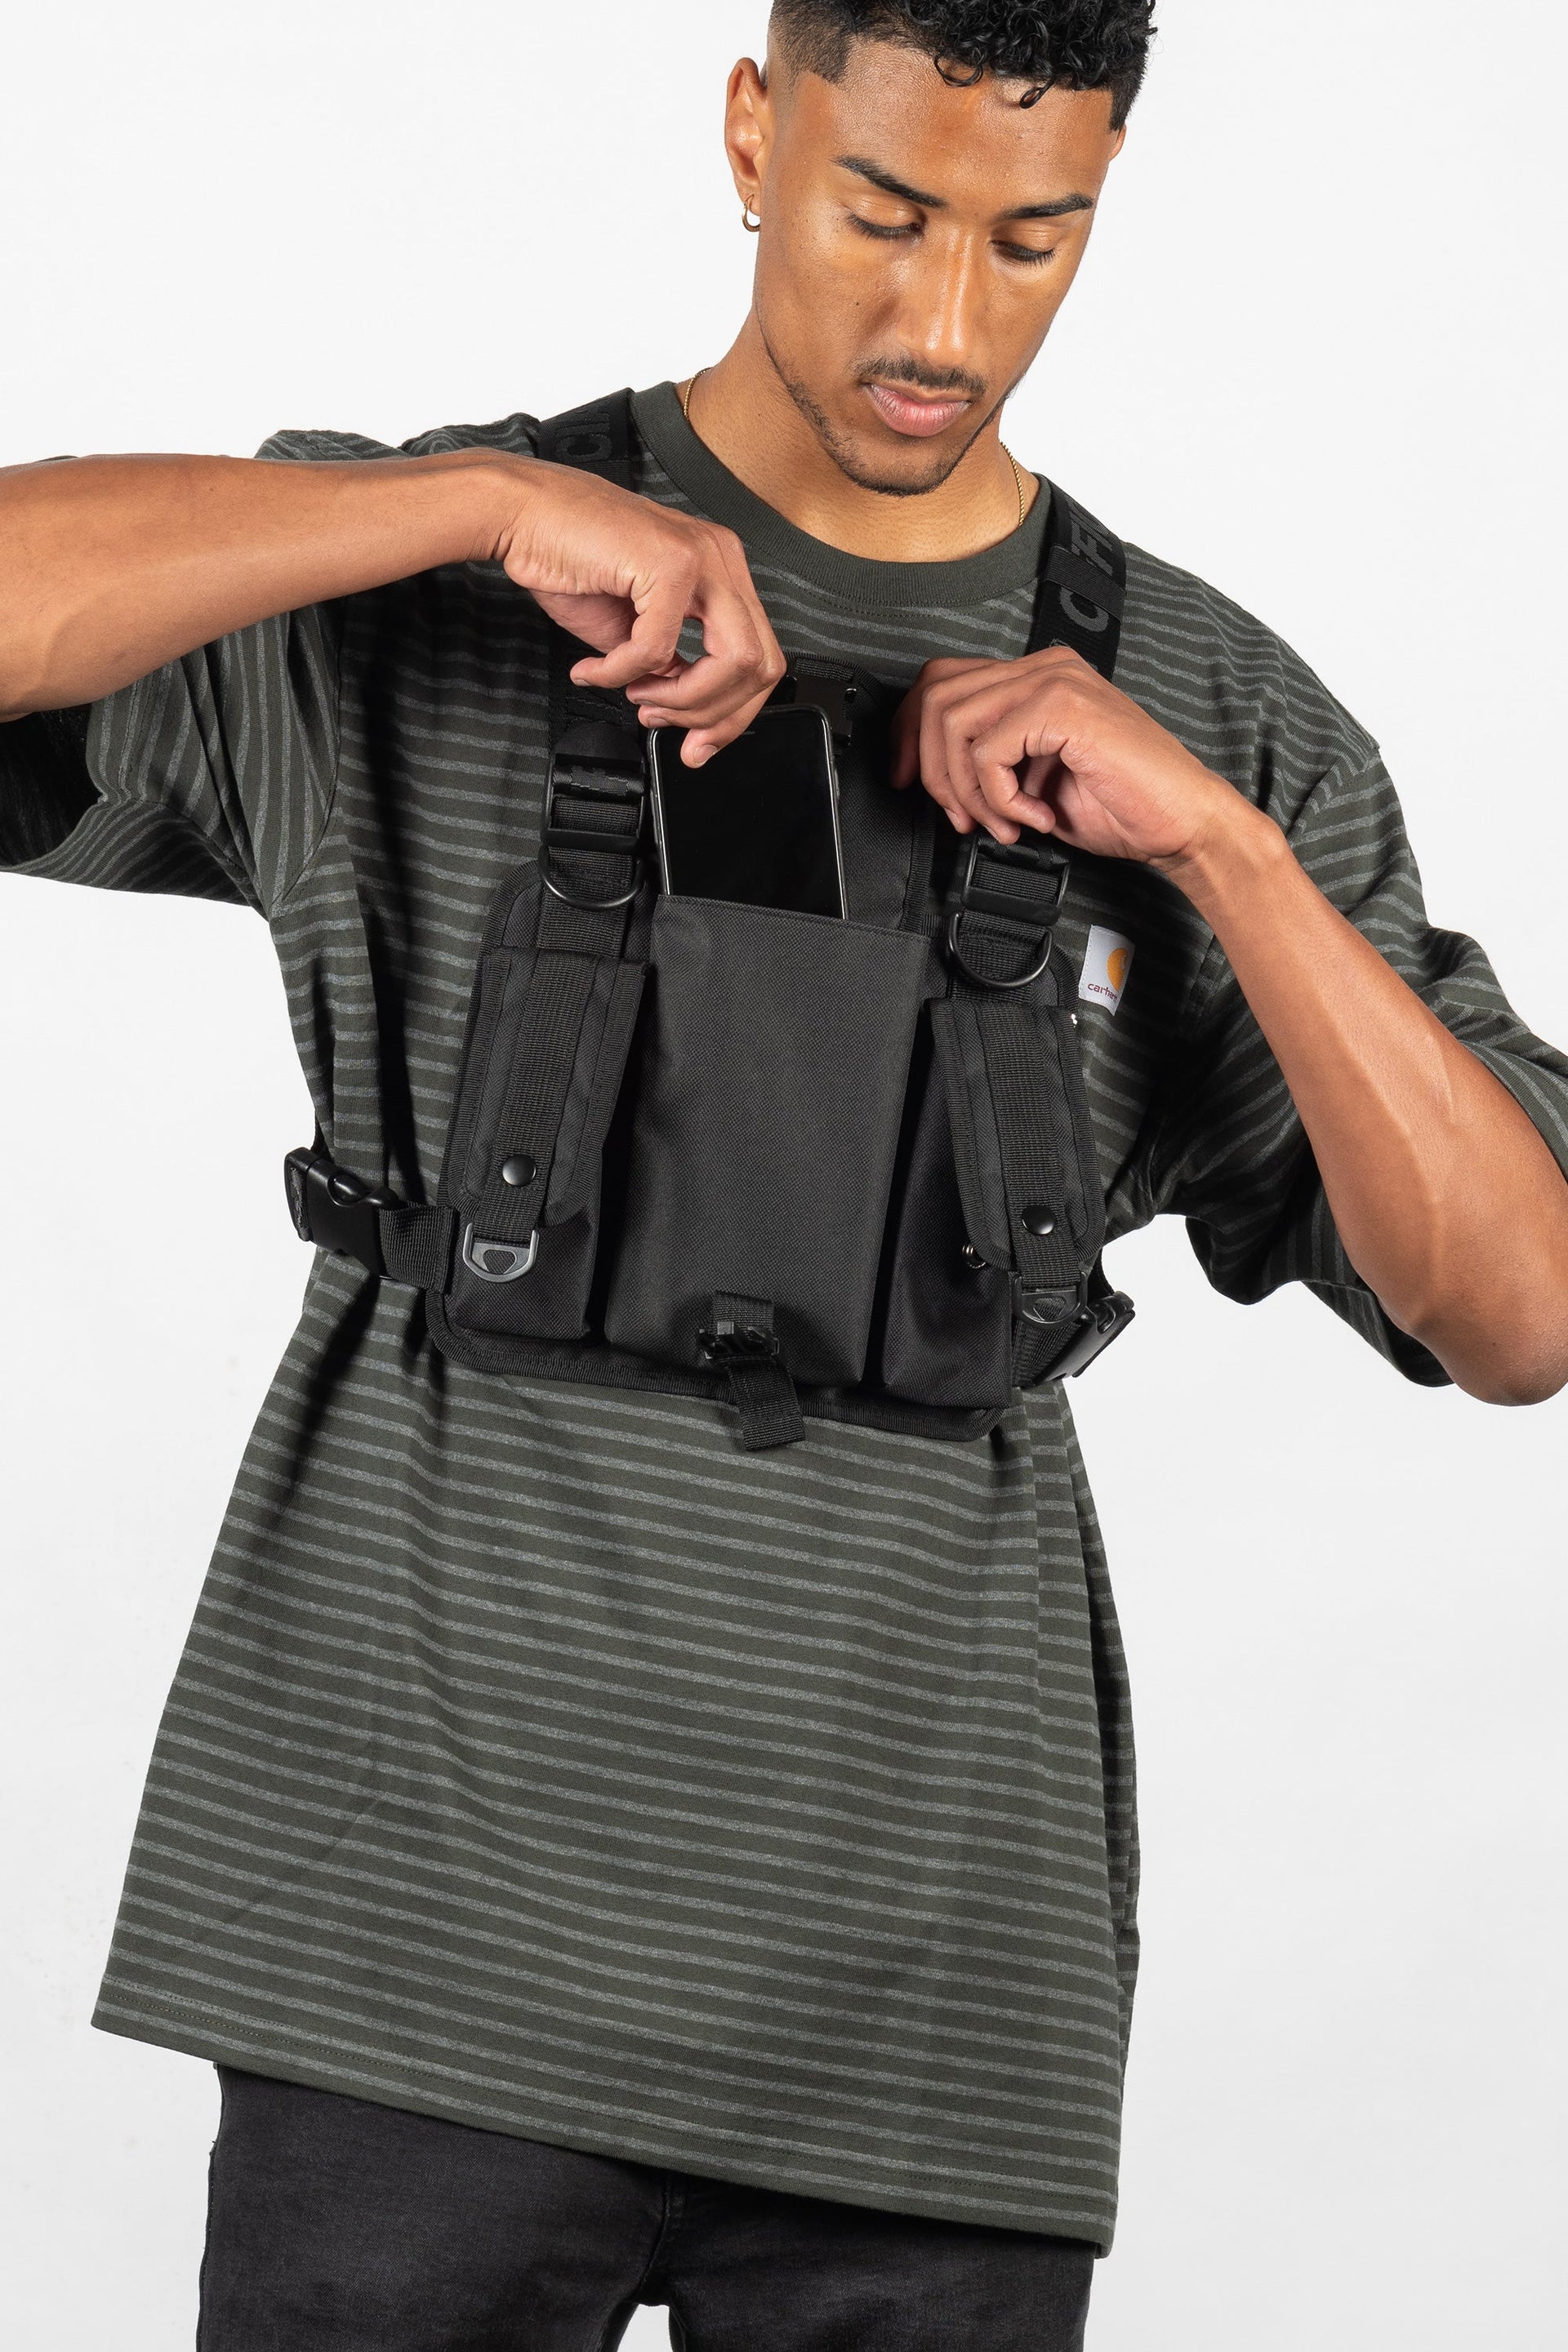 The main pocket opened on the Streetwear Tactics Chest Bag Utility Vest | Official Black